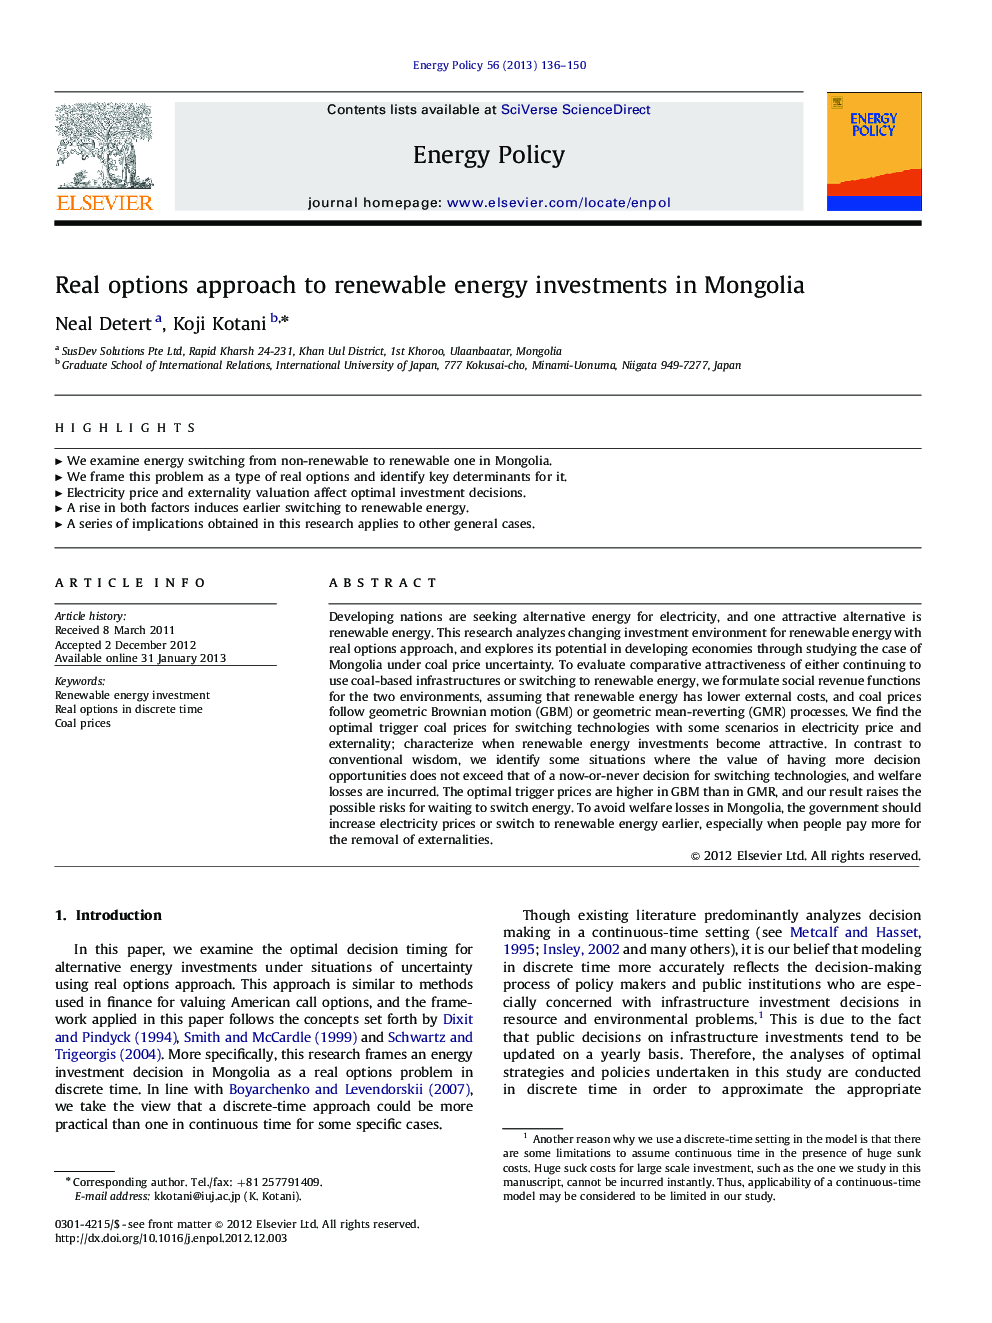 Real options approach to renewable energy investments in Mongolia